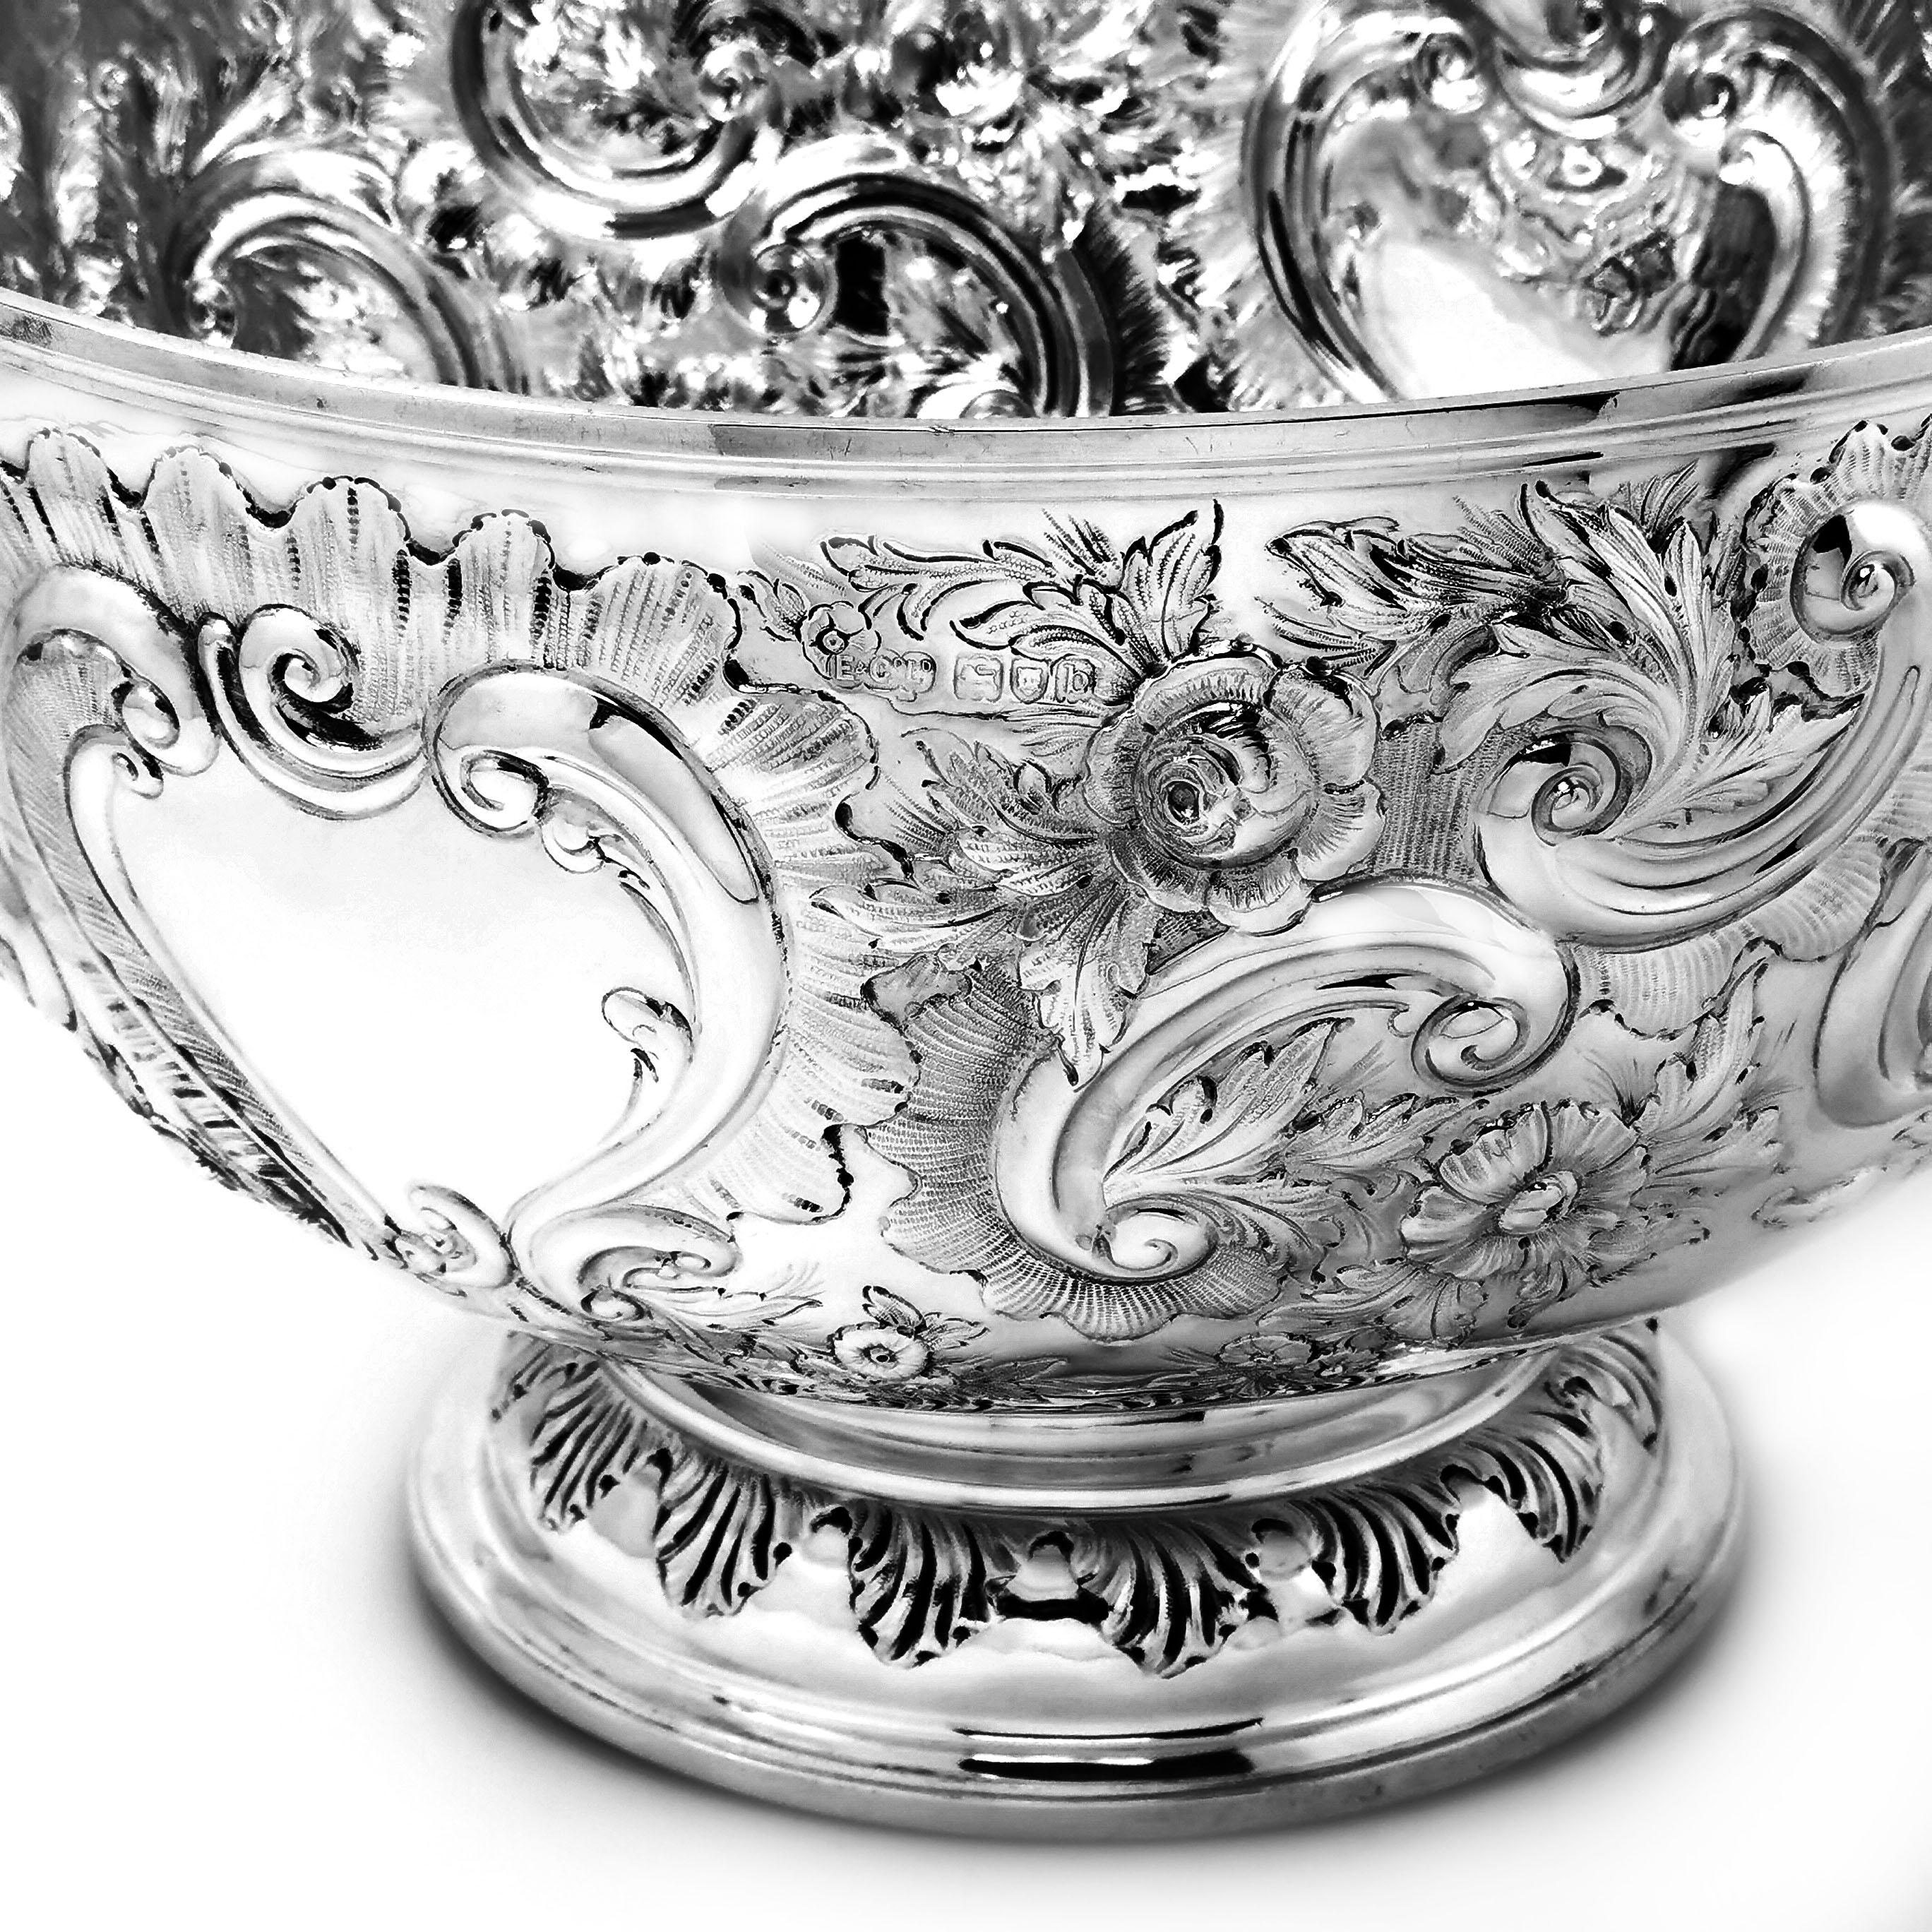 English Large Antique Victorian Sterling Silver Bowl 1897 Punch Champagne Cooler